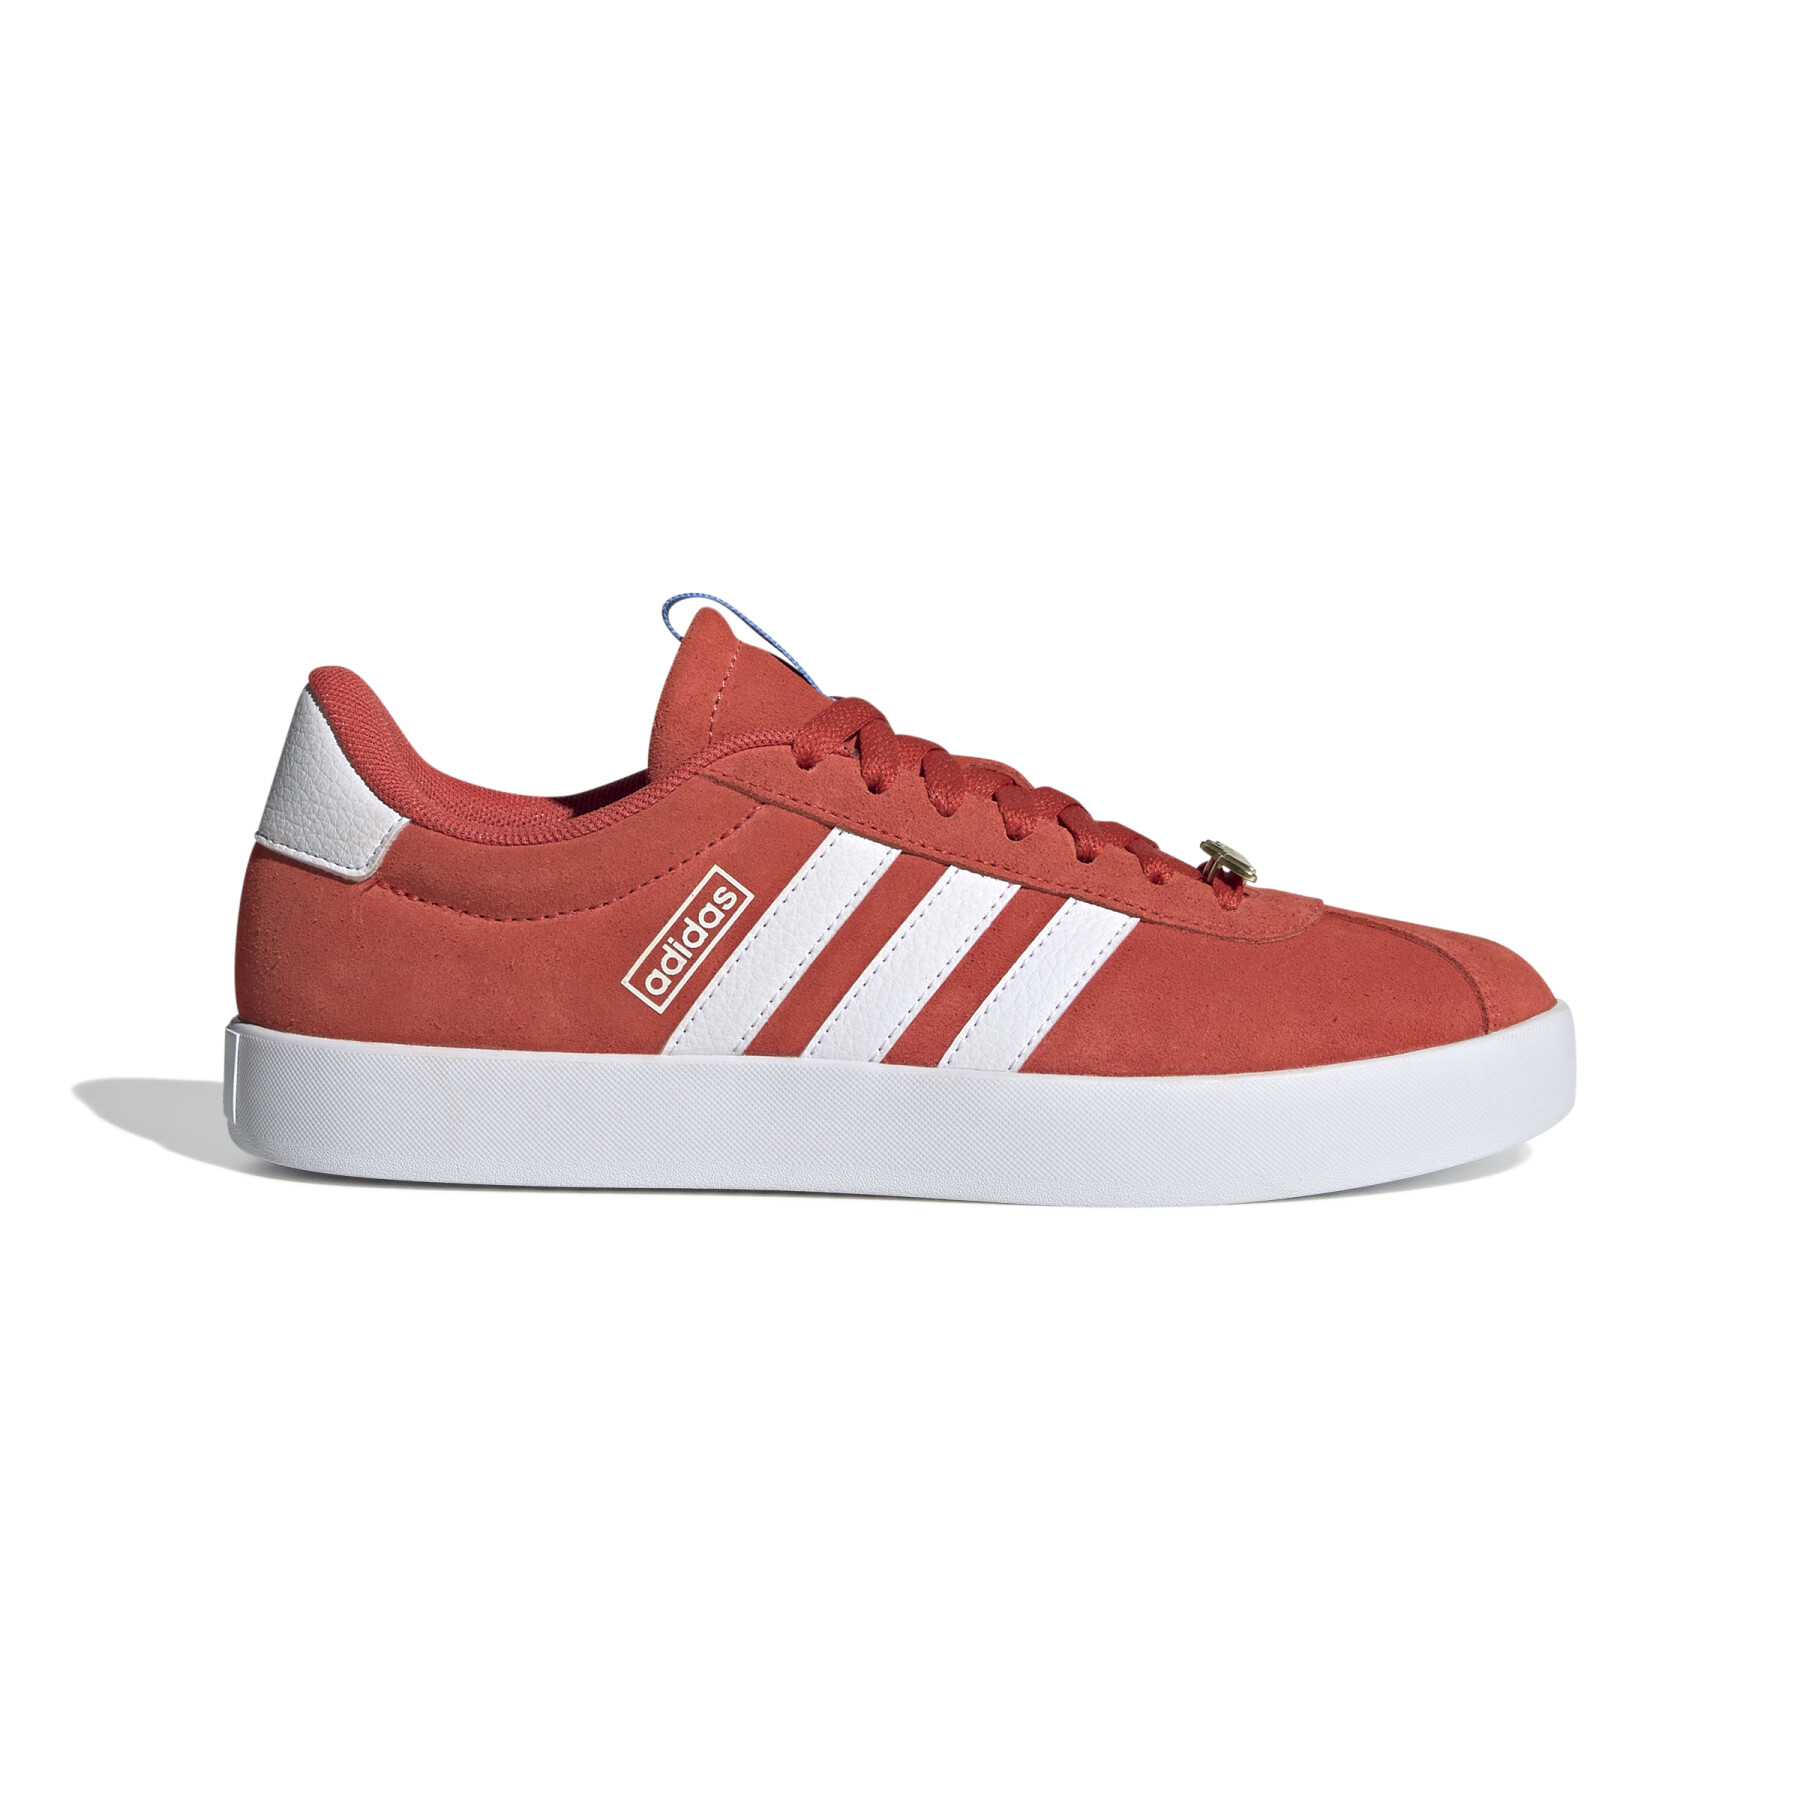 adidas VL Court 3.0 Shoes - Pink, Women's Lifestyle